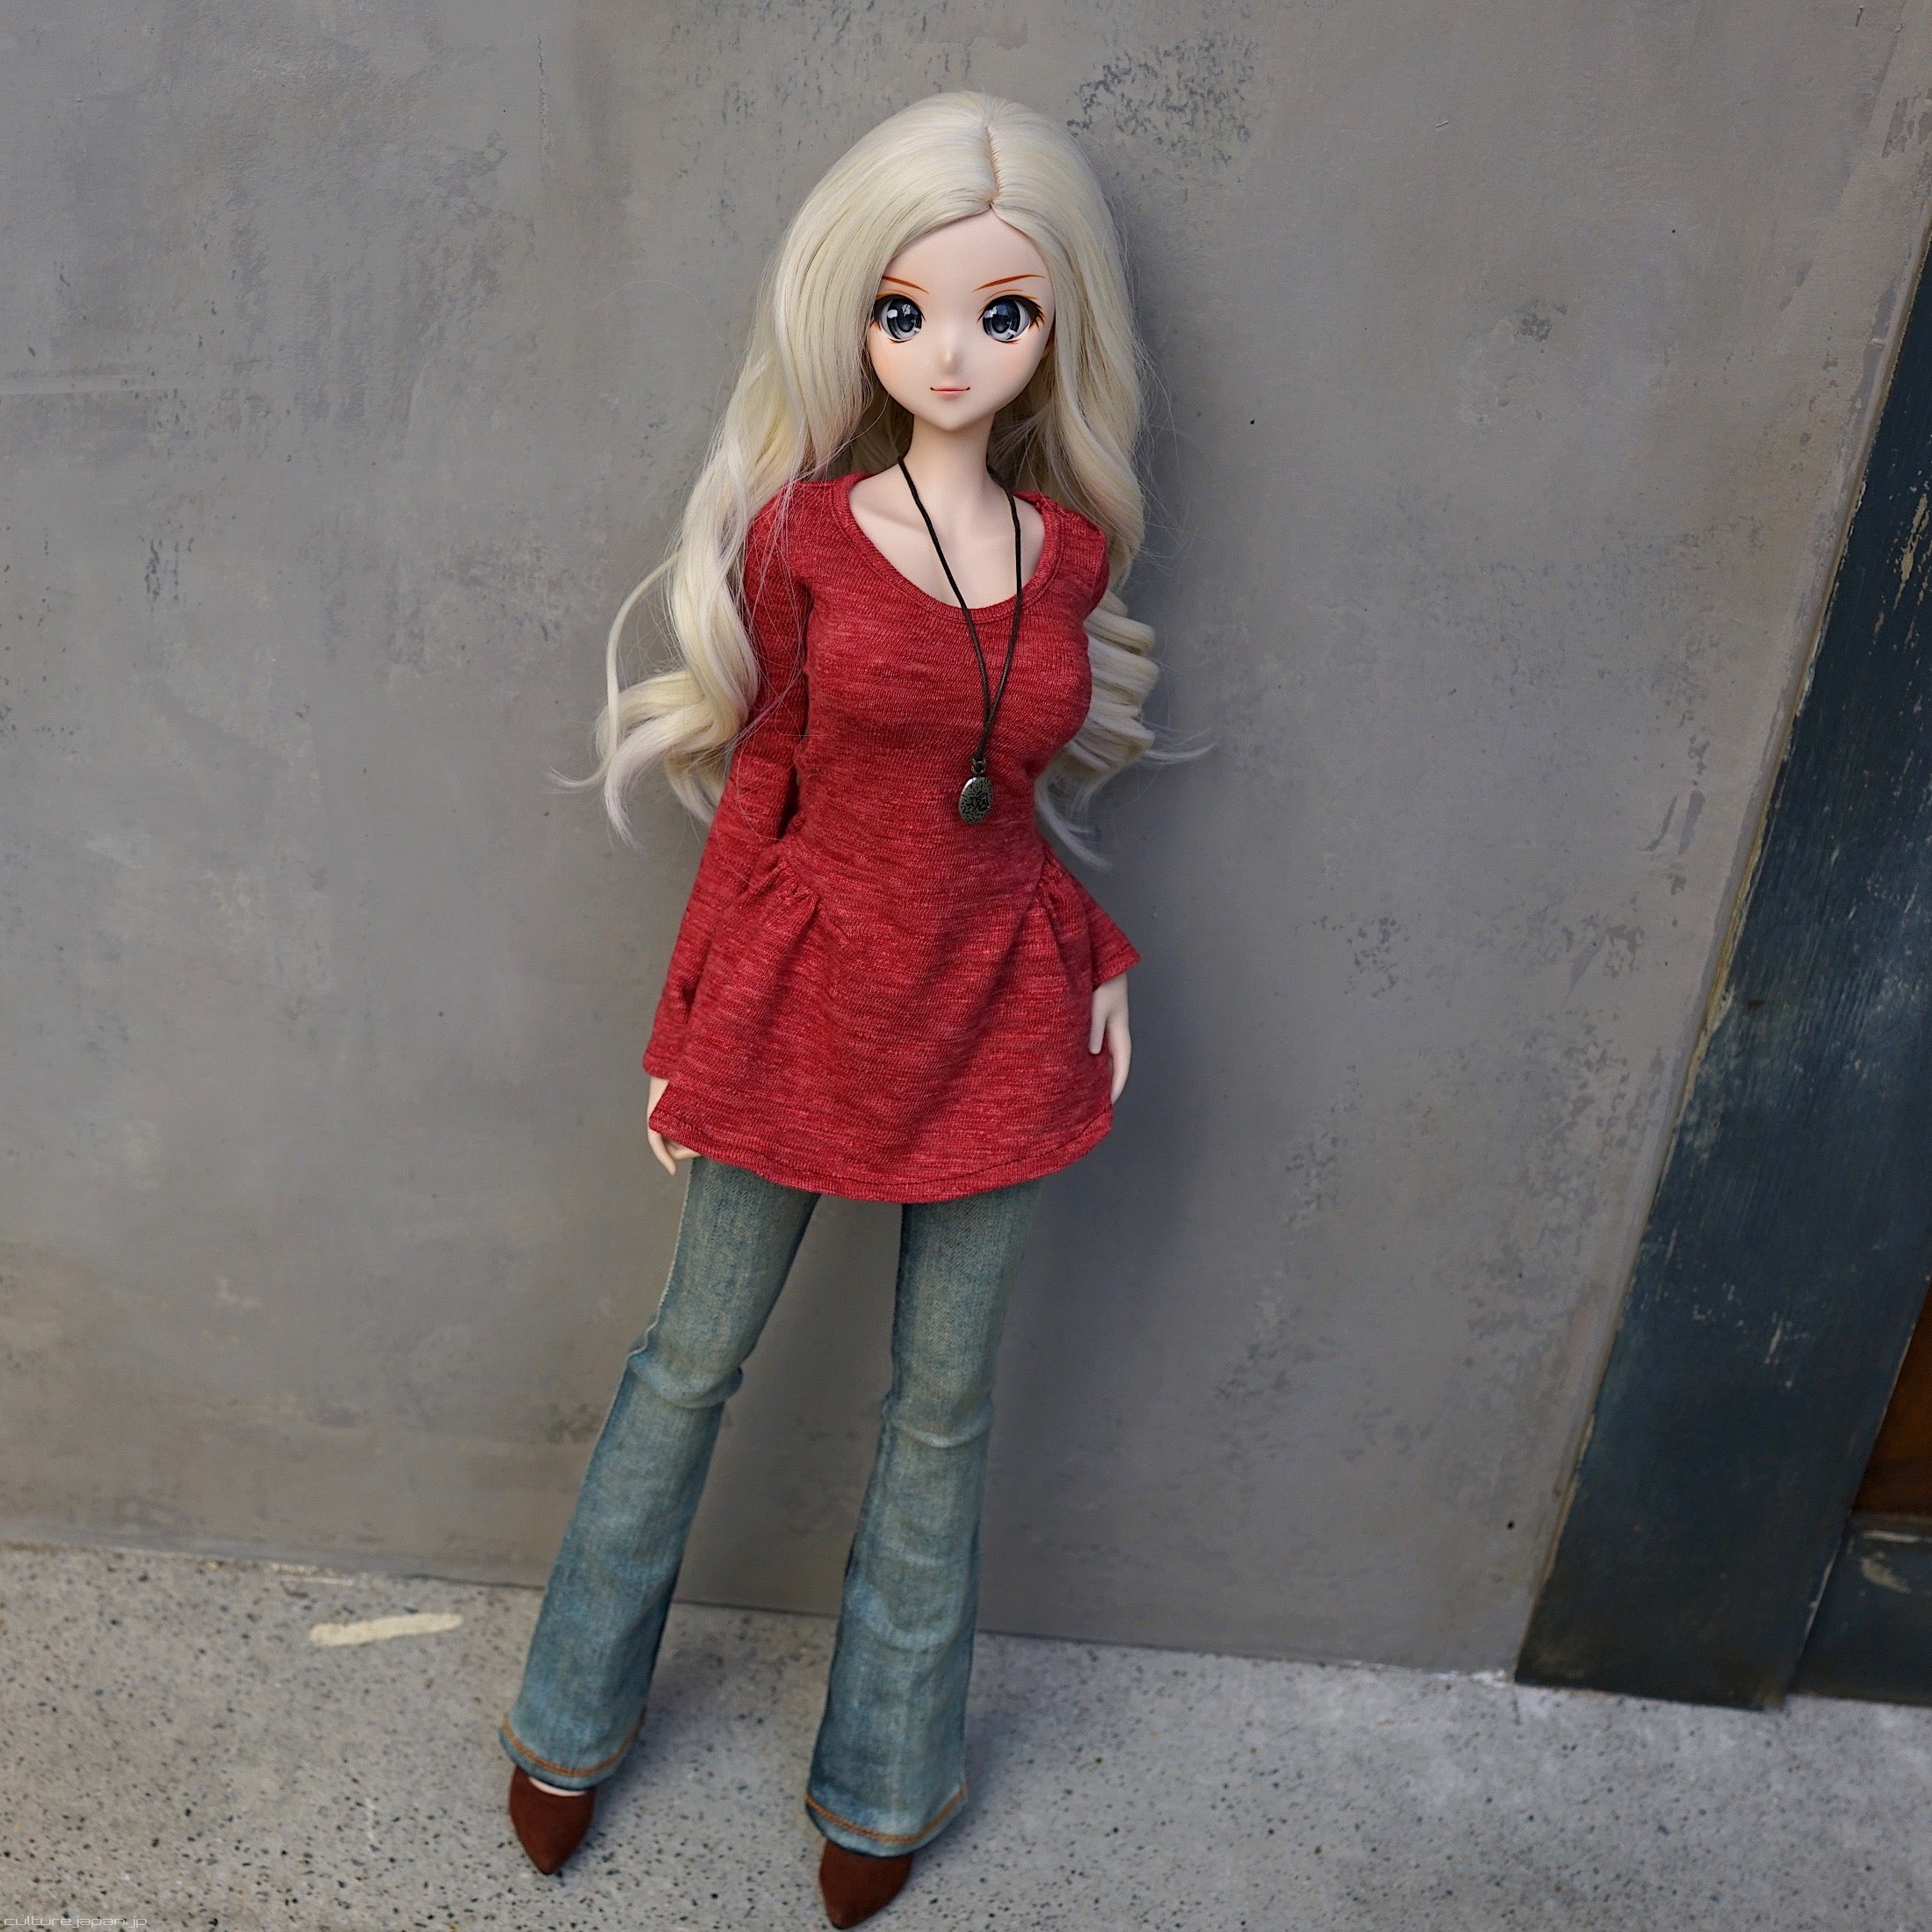 The Smart Doll Body